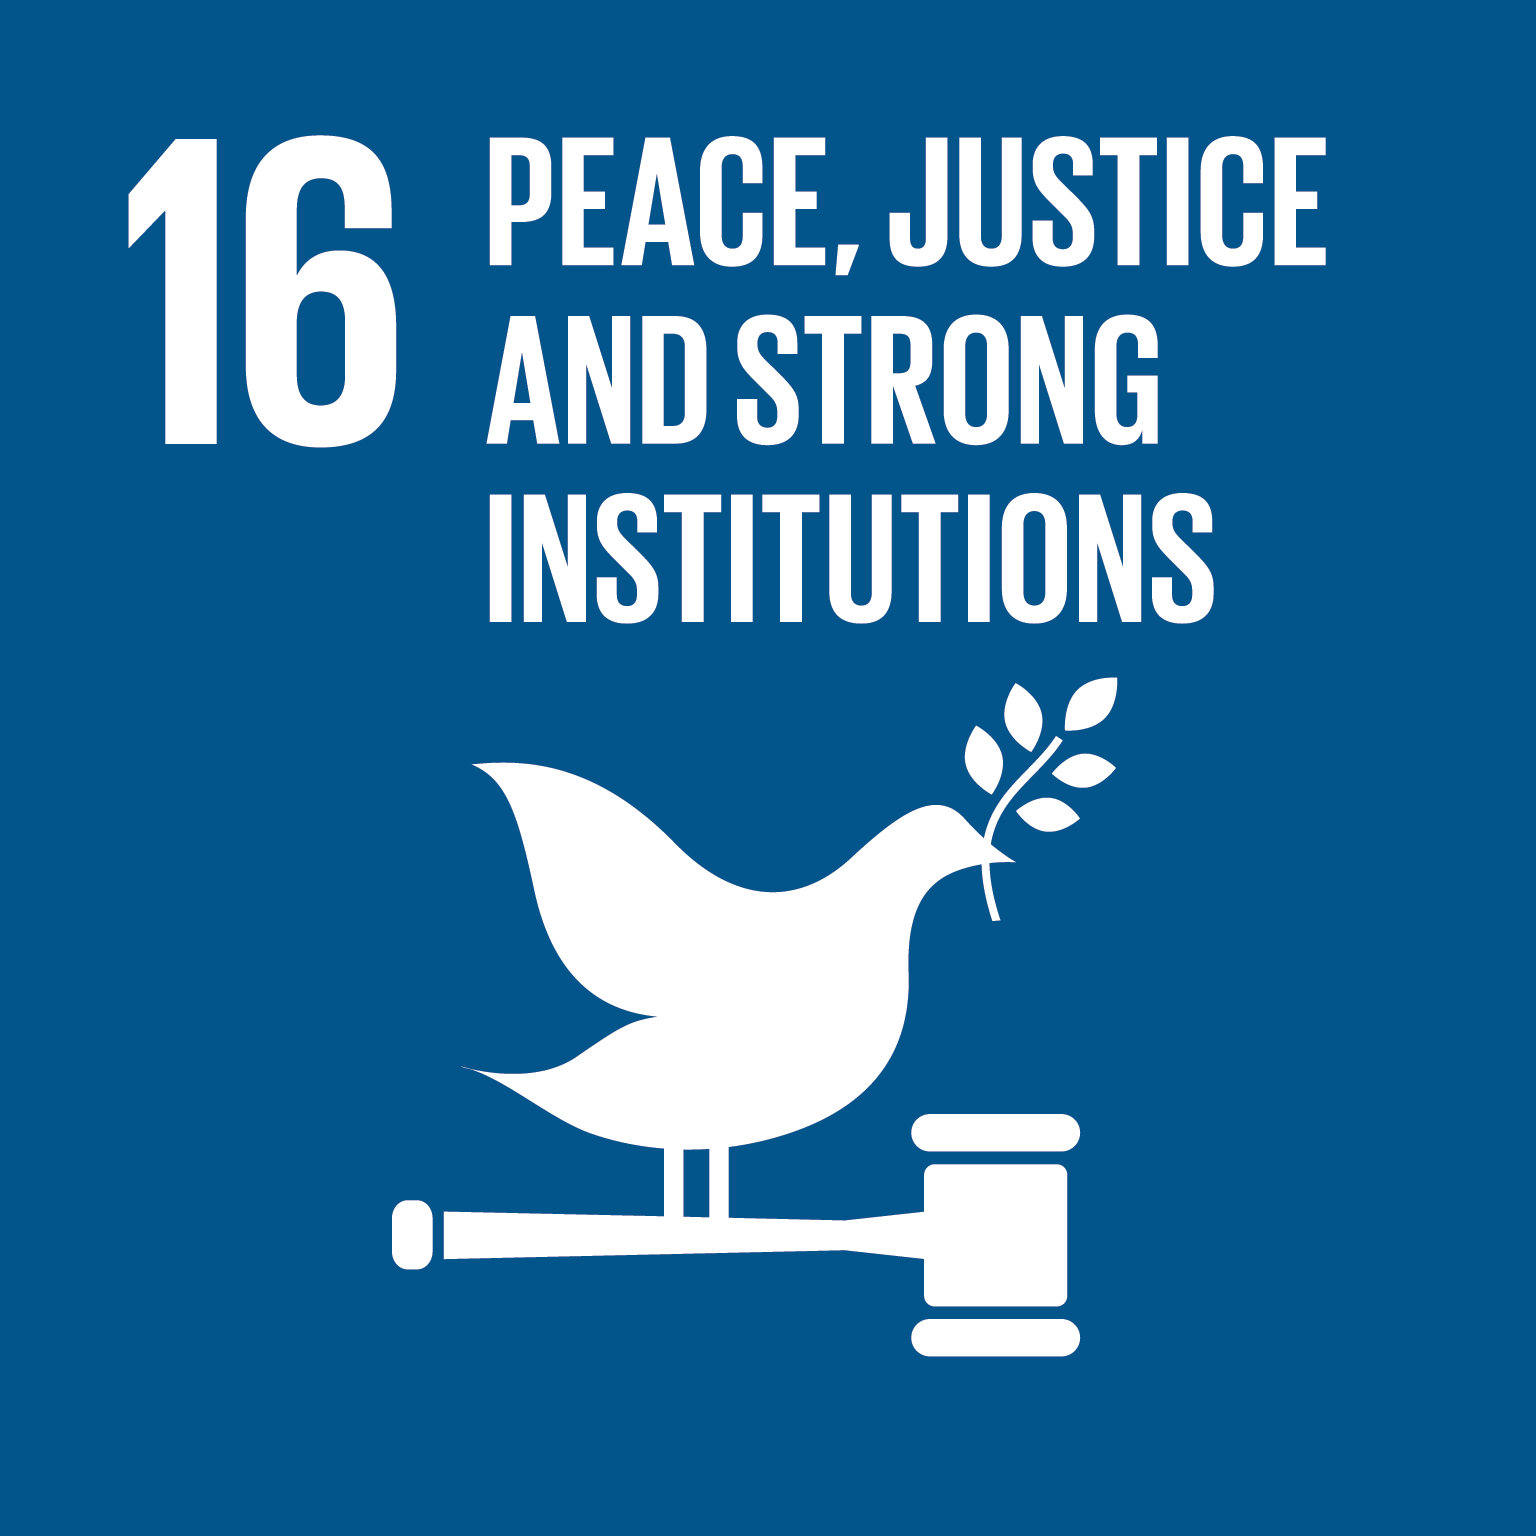 SDG #16 - Peace, Justice, and Strong Institutions